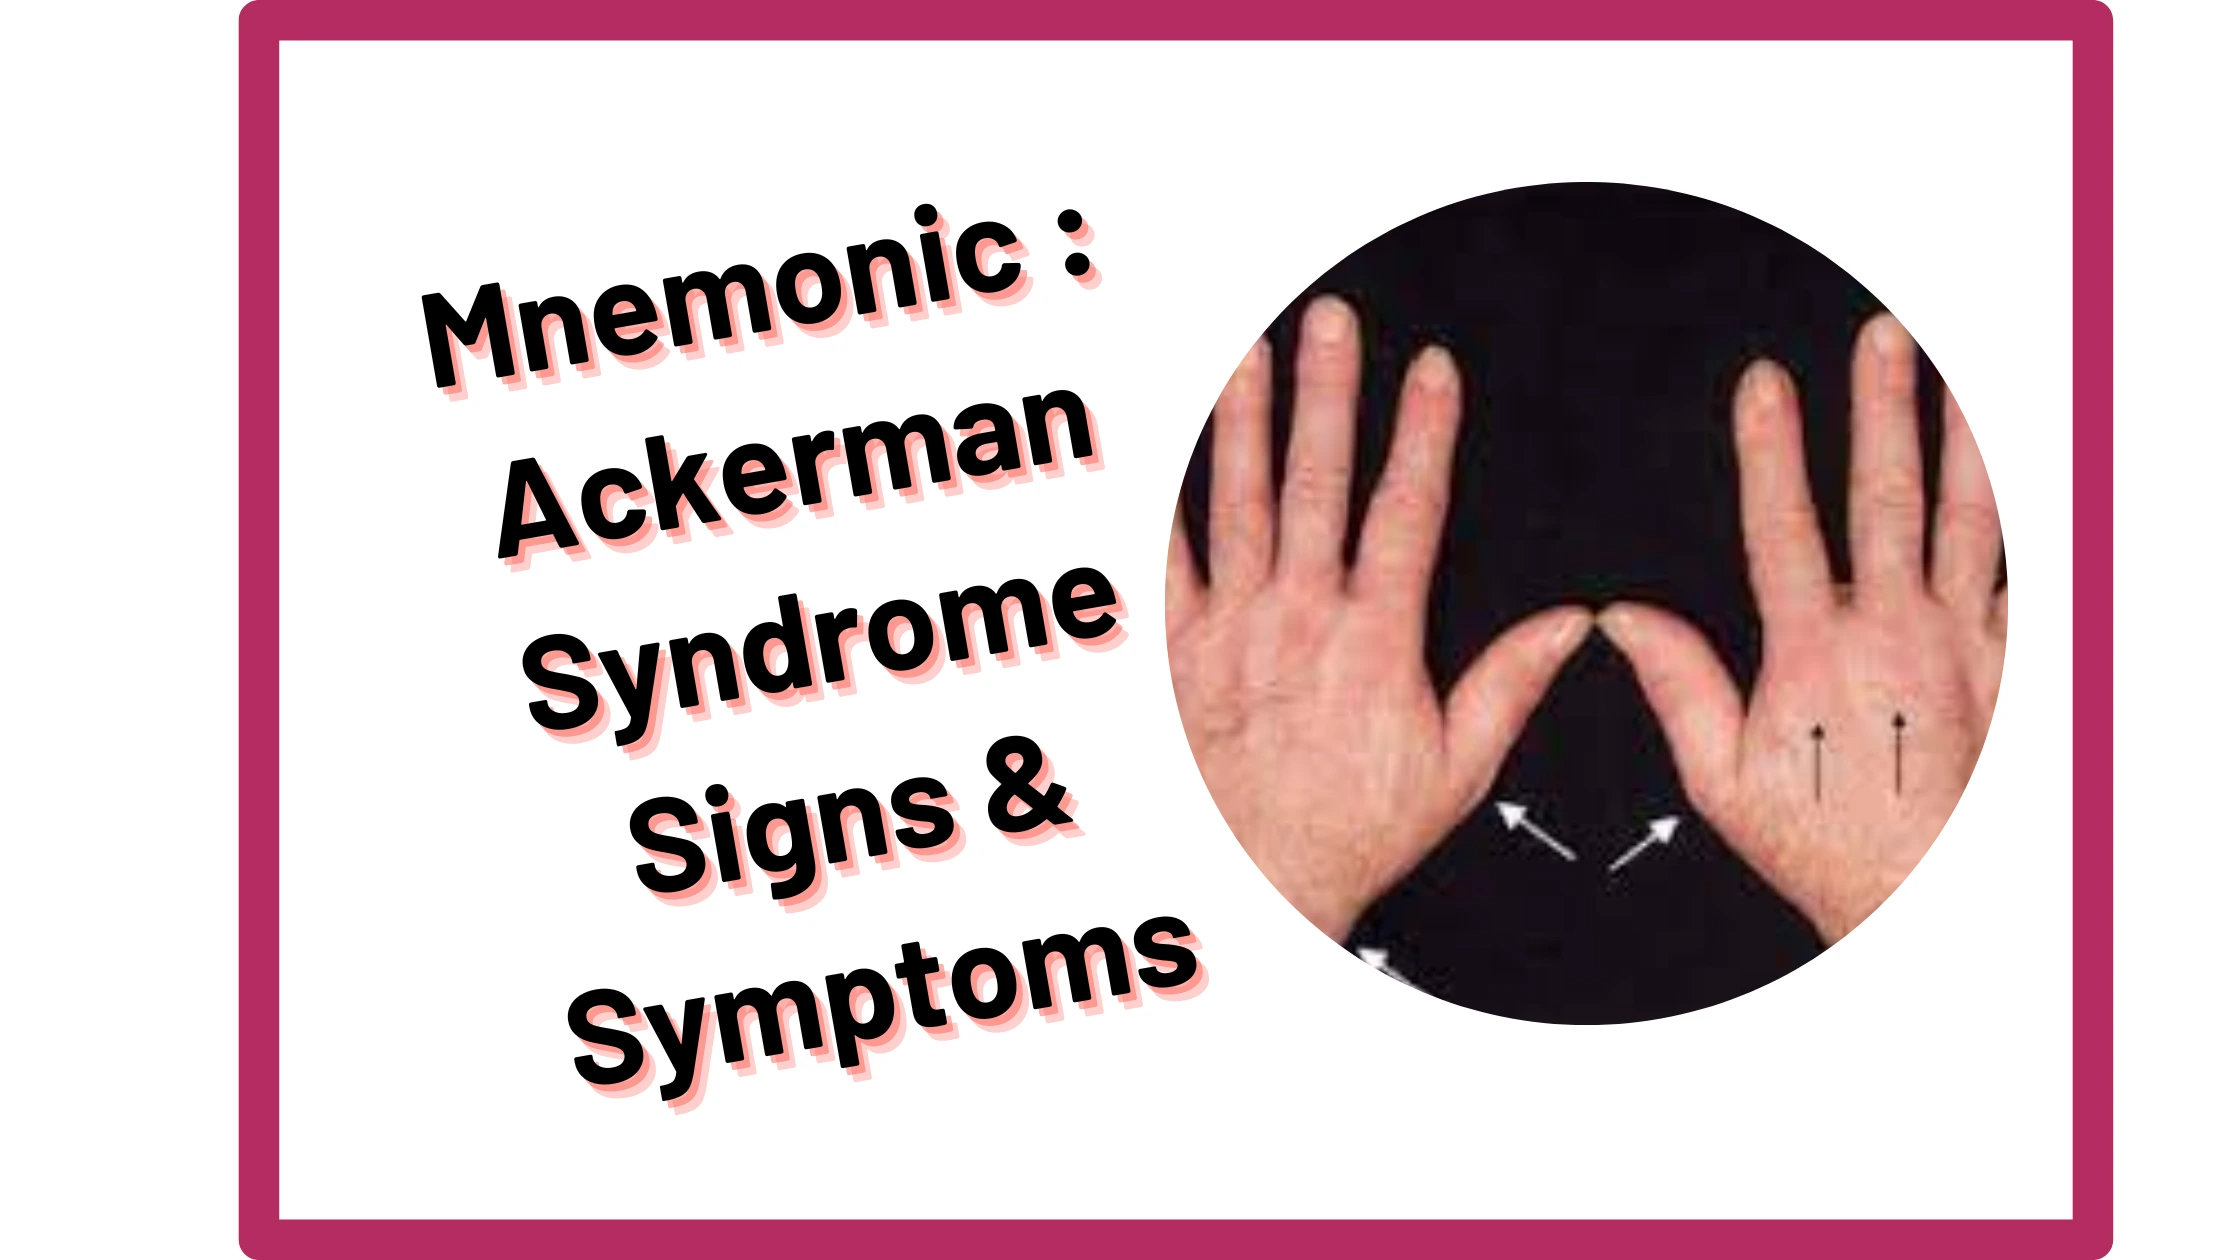 You are currently viewing [Very Cool] Mnemonic : Ackerman Syndrome Signs & Symptoms